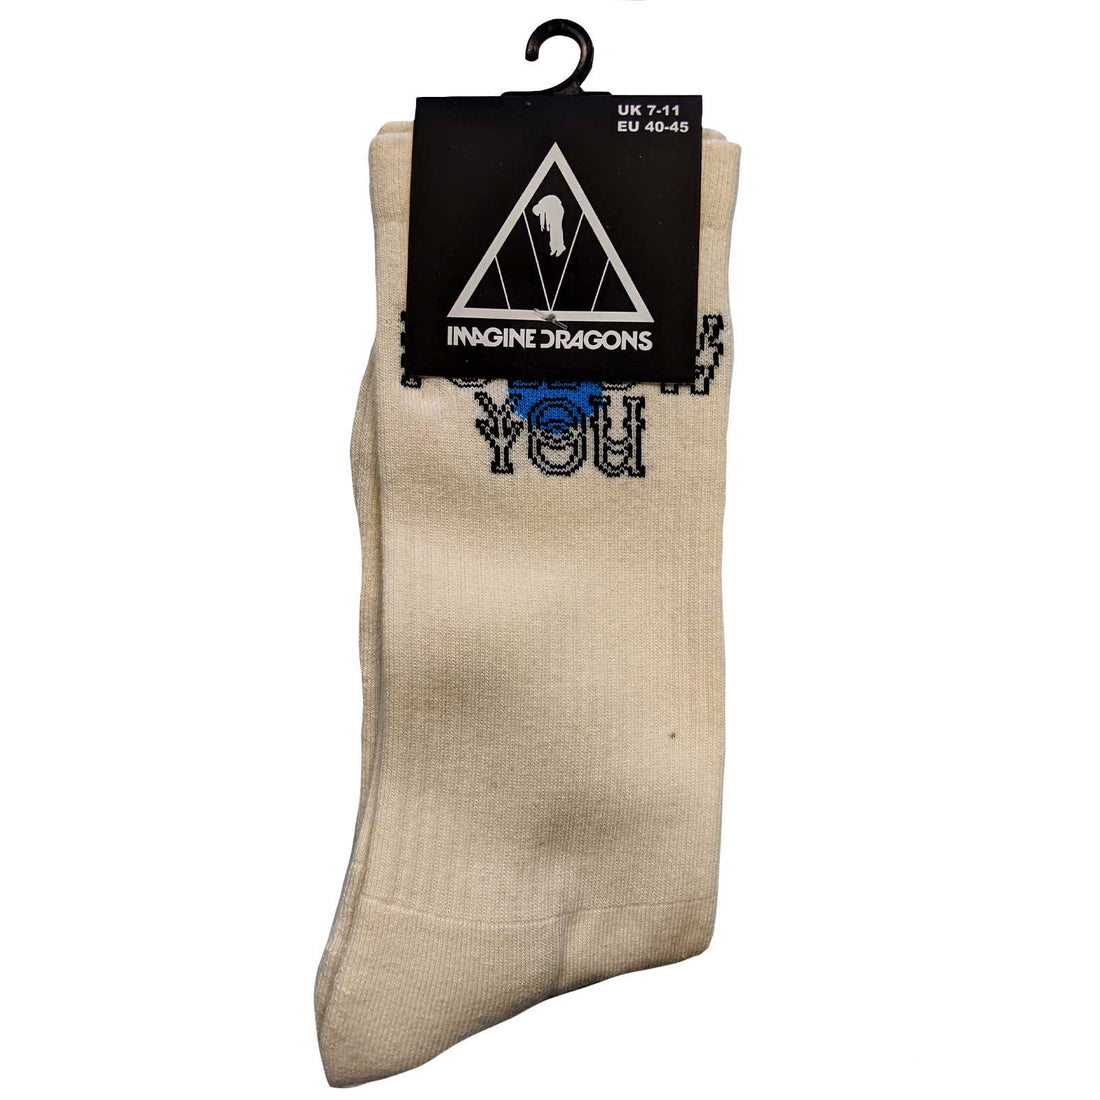 Imagine Dragons Ankle Socks: Follow You (US Size 8 - 10)